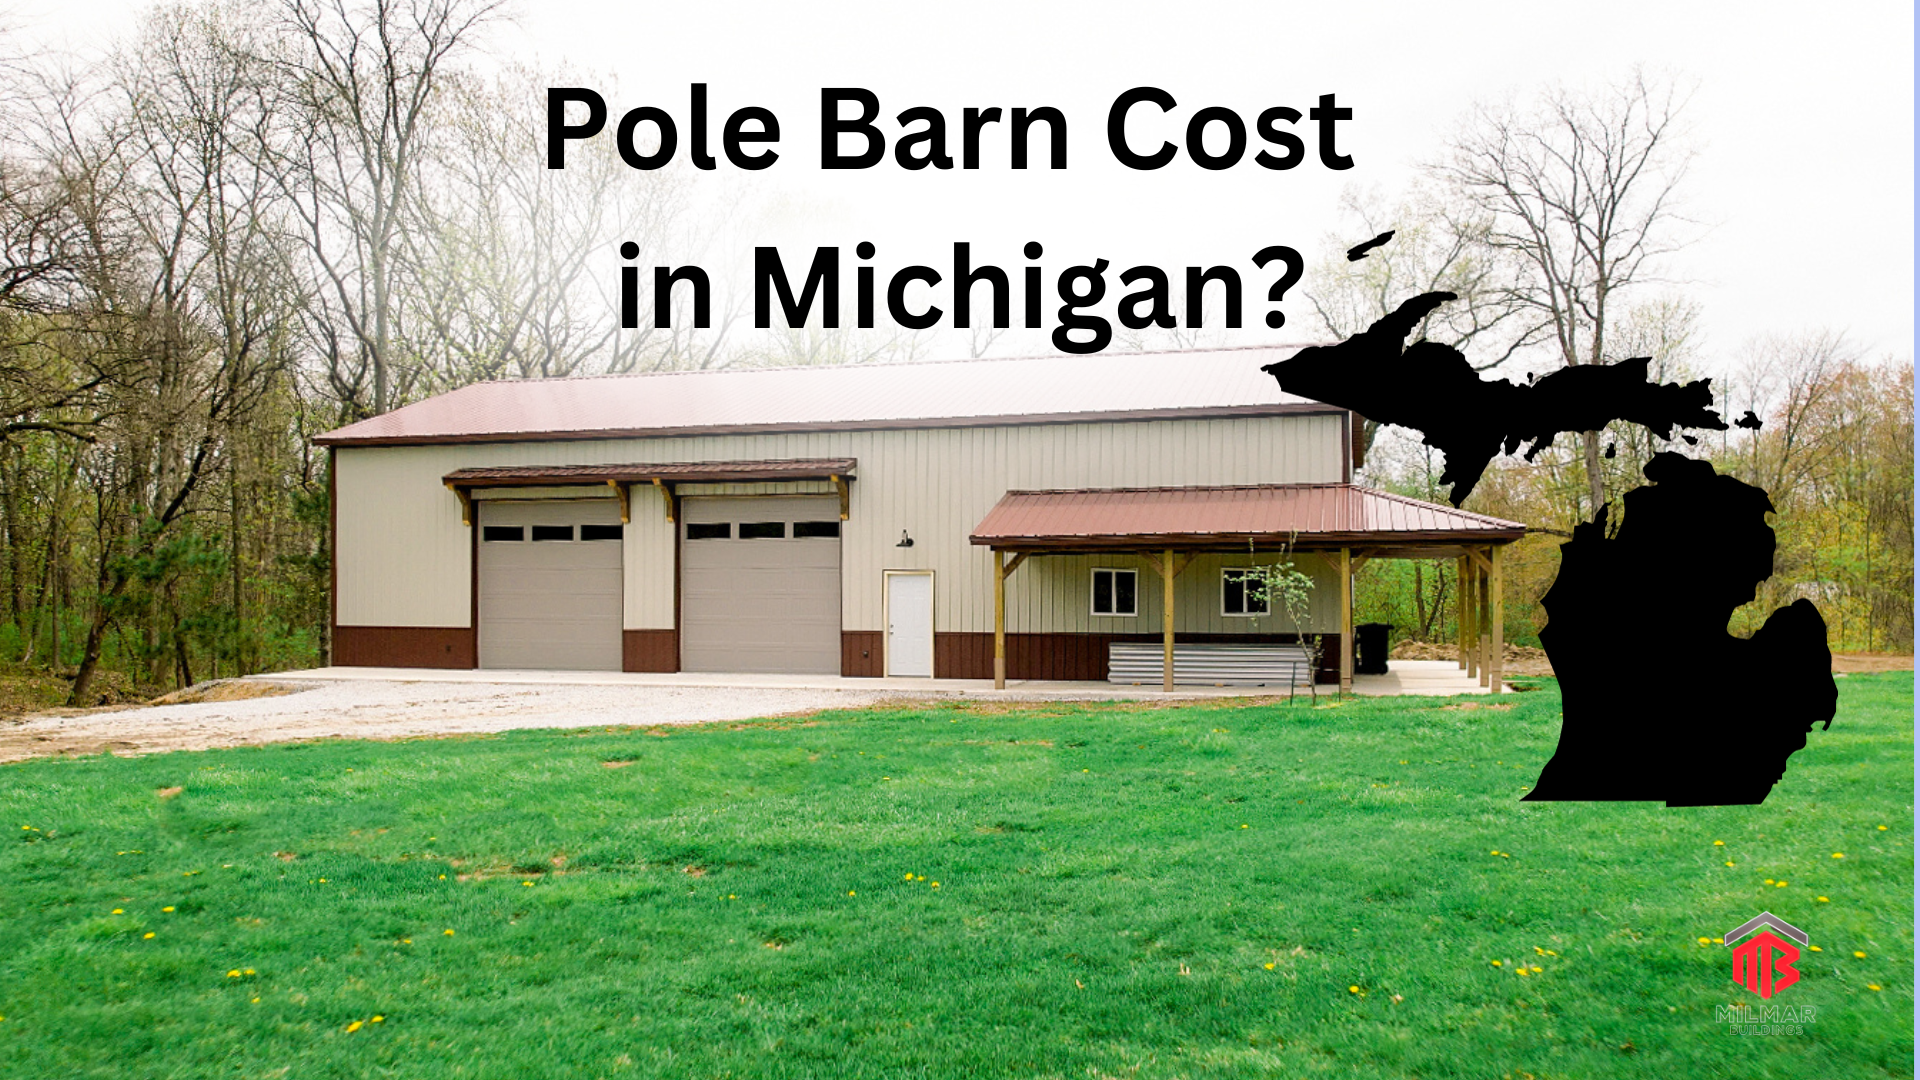 Cost to build a Pole Barn in Michigan? - Image